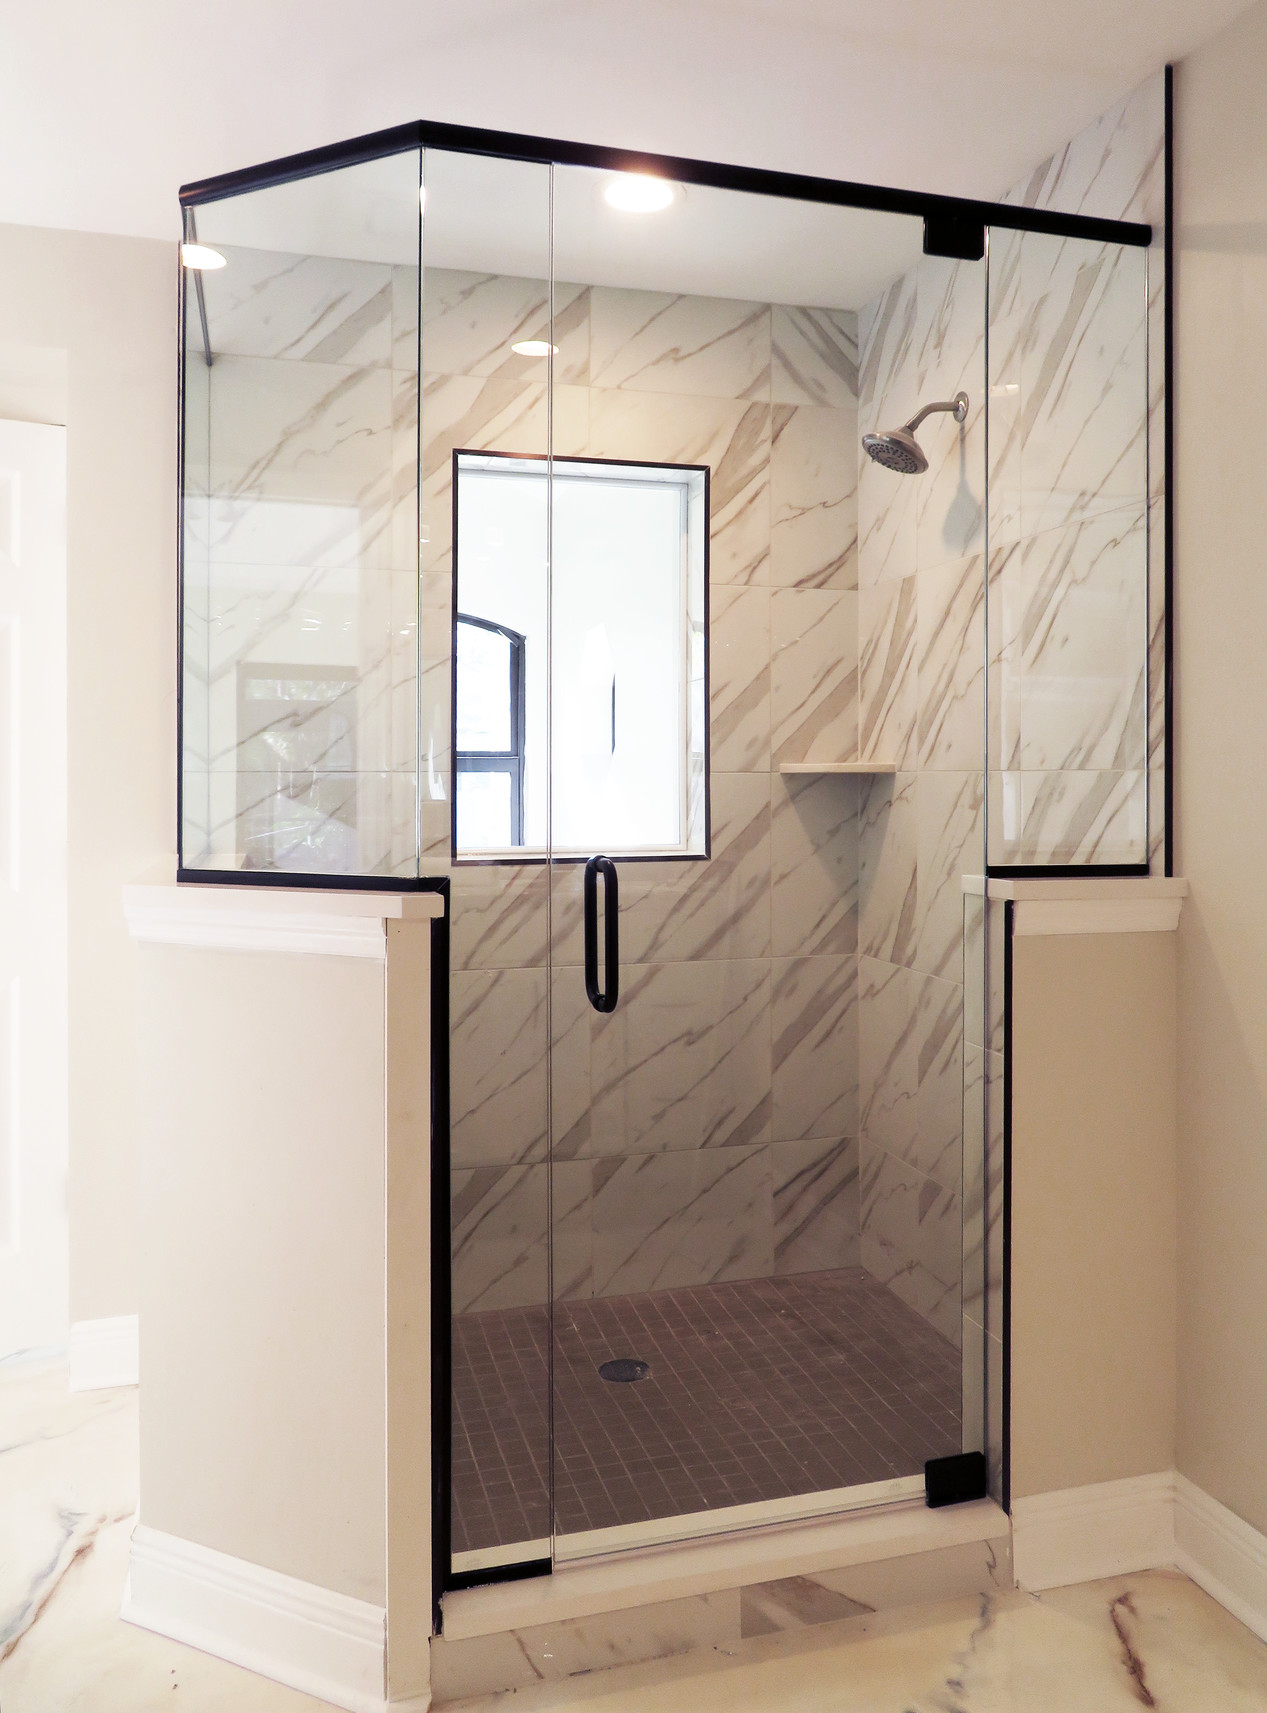 Glass, Doors, Showers, and More!